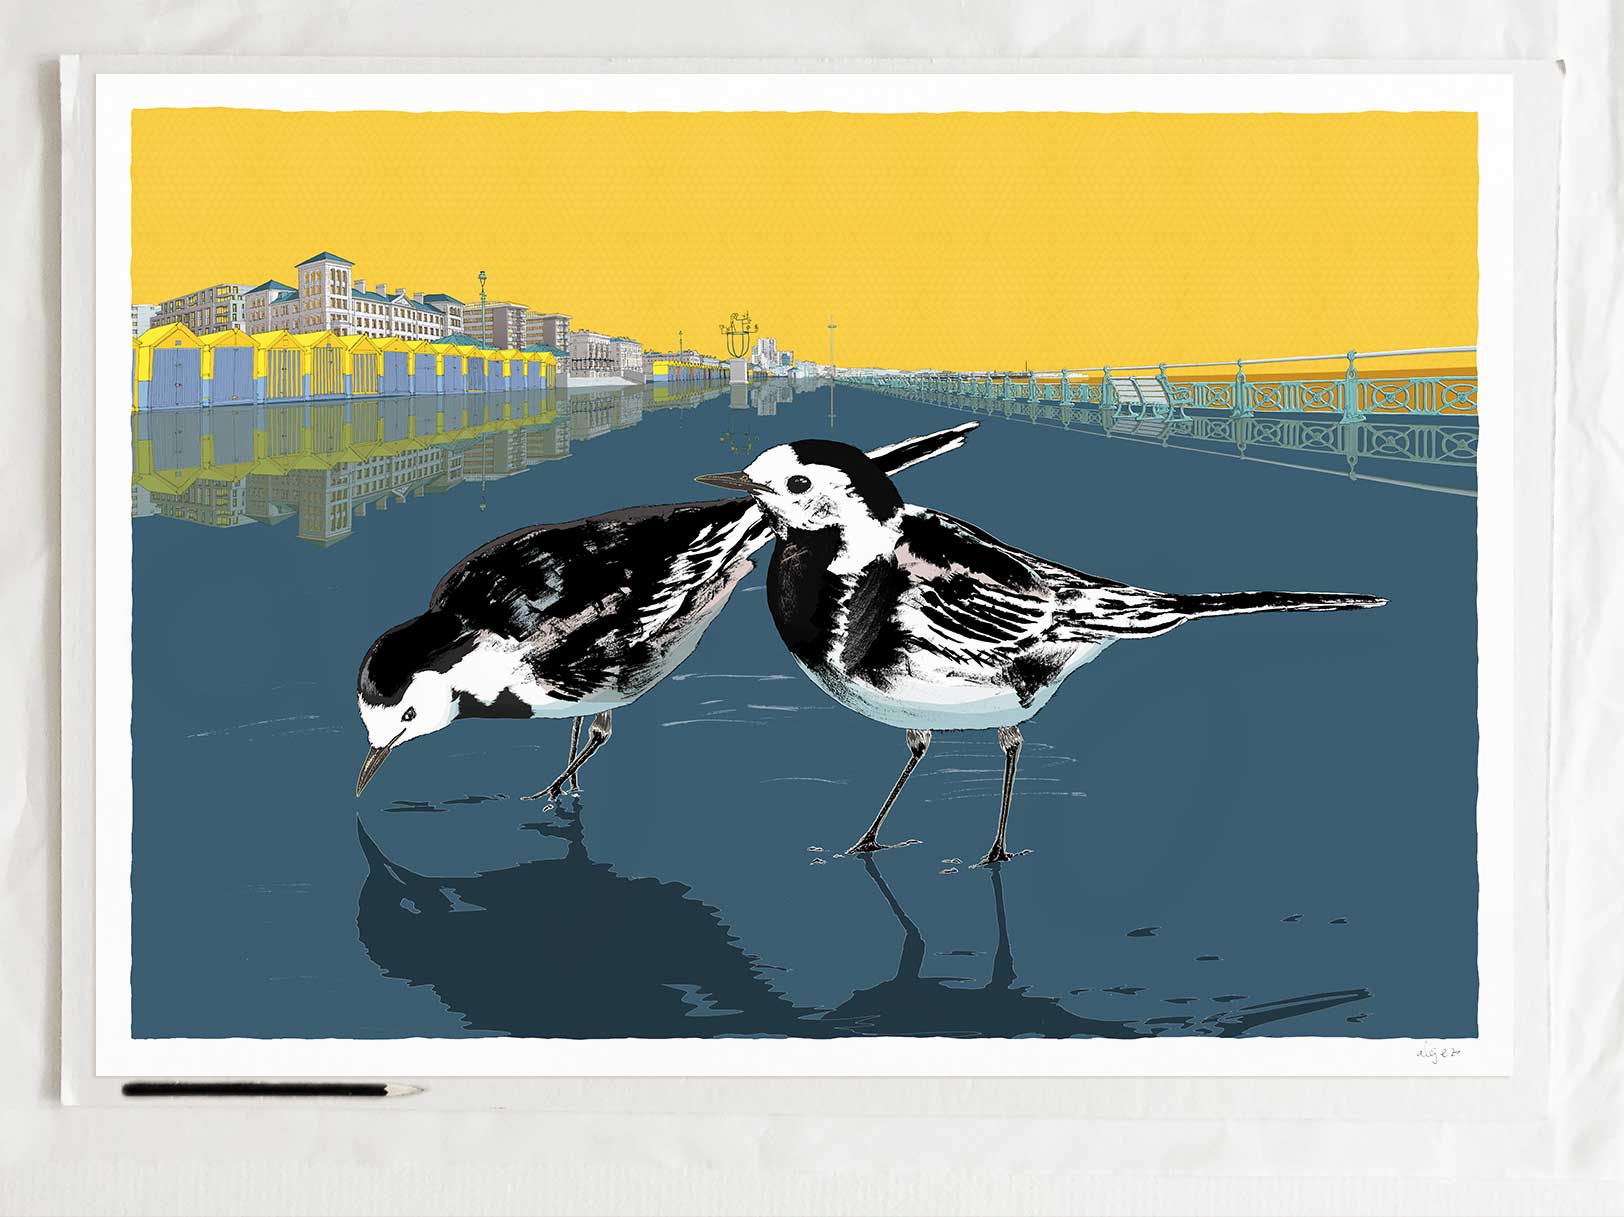 art print titled Wagtails by Hove Plinth Brighton Seafront by artist alej ez